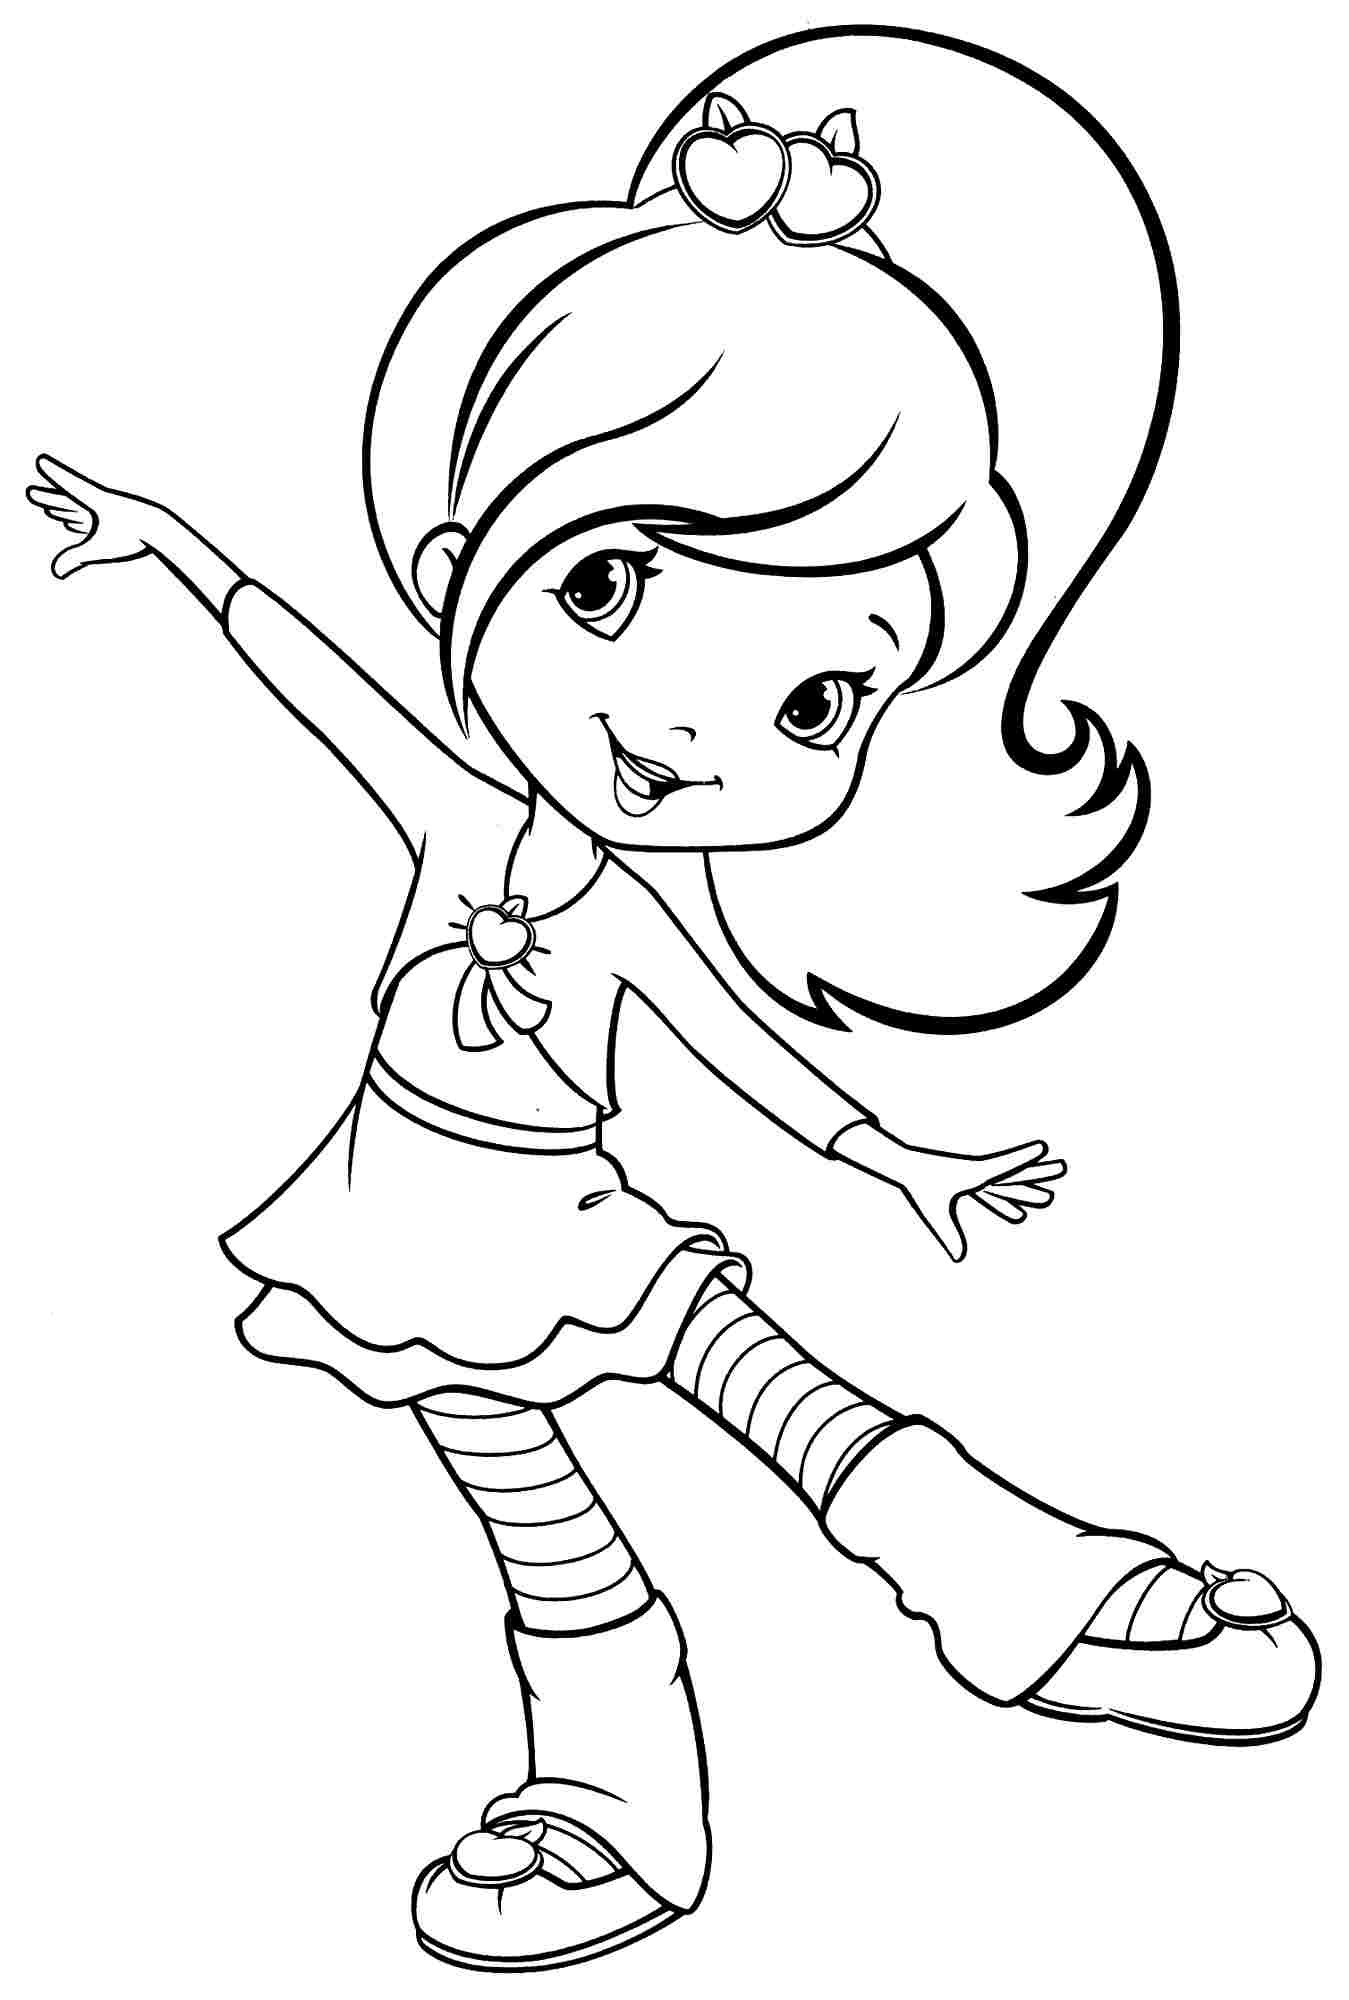 Online Coloring Sheets For Girls
 Coloring Pages for Girls Best Coloring Pages For Kids